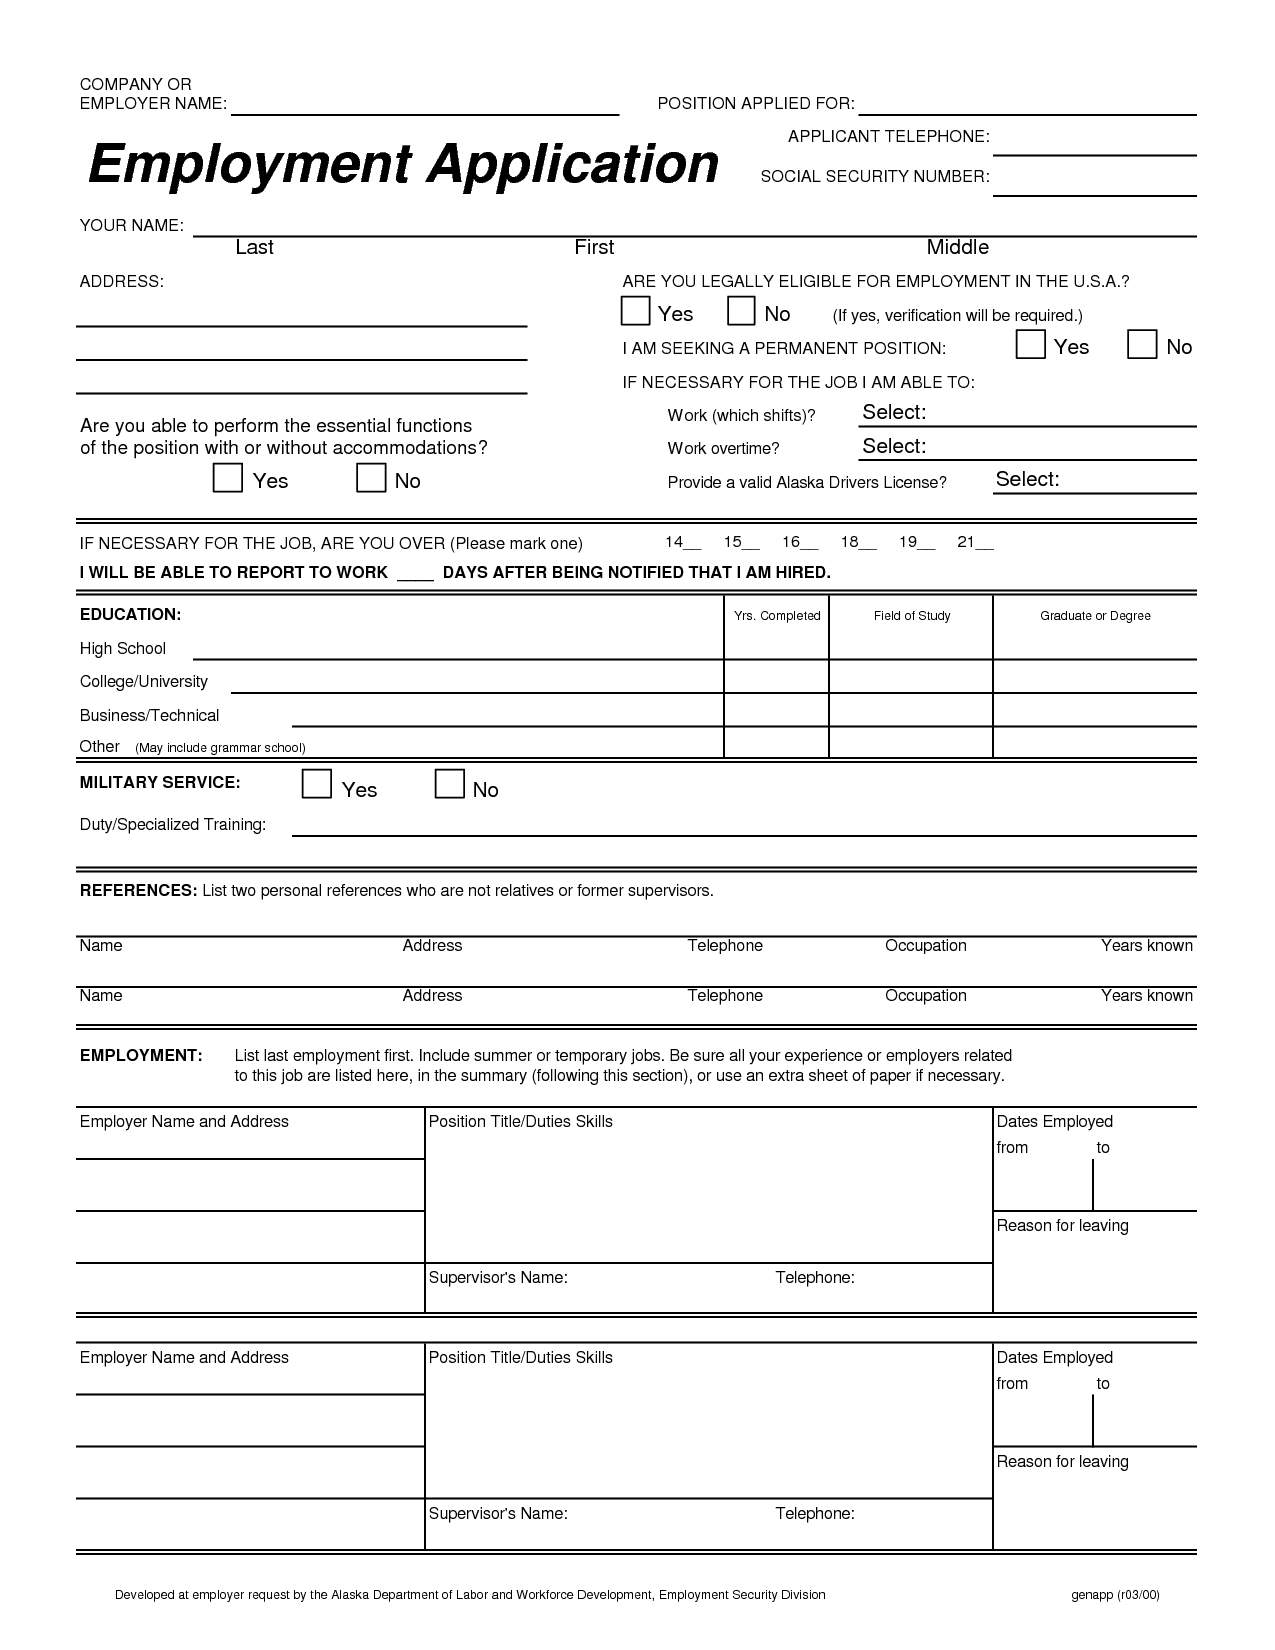 Rαy Bαn Sunglassés ??? Love This! It Is Fabulous! … | Employment - Application For Employment Form Free Printable